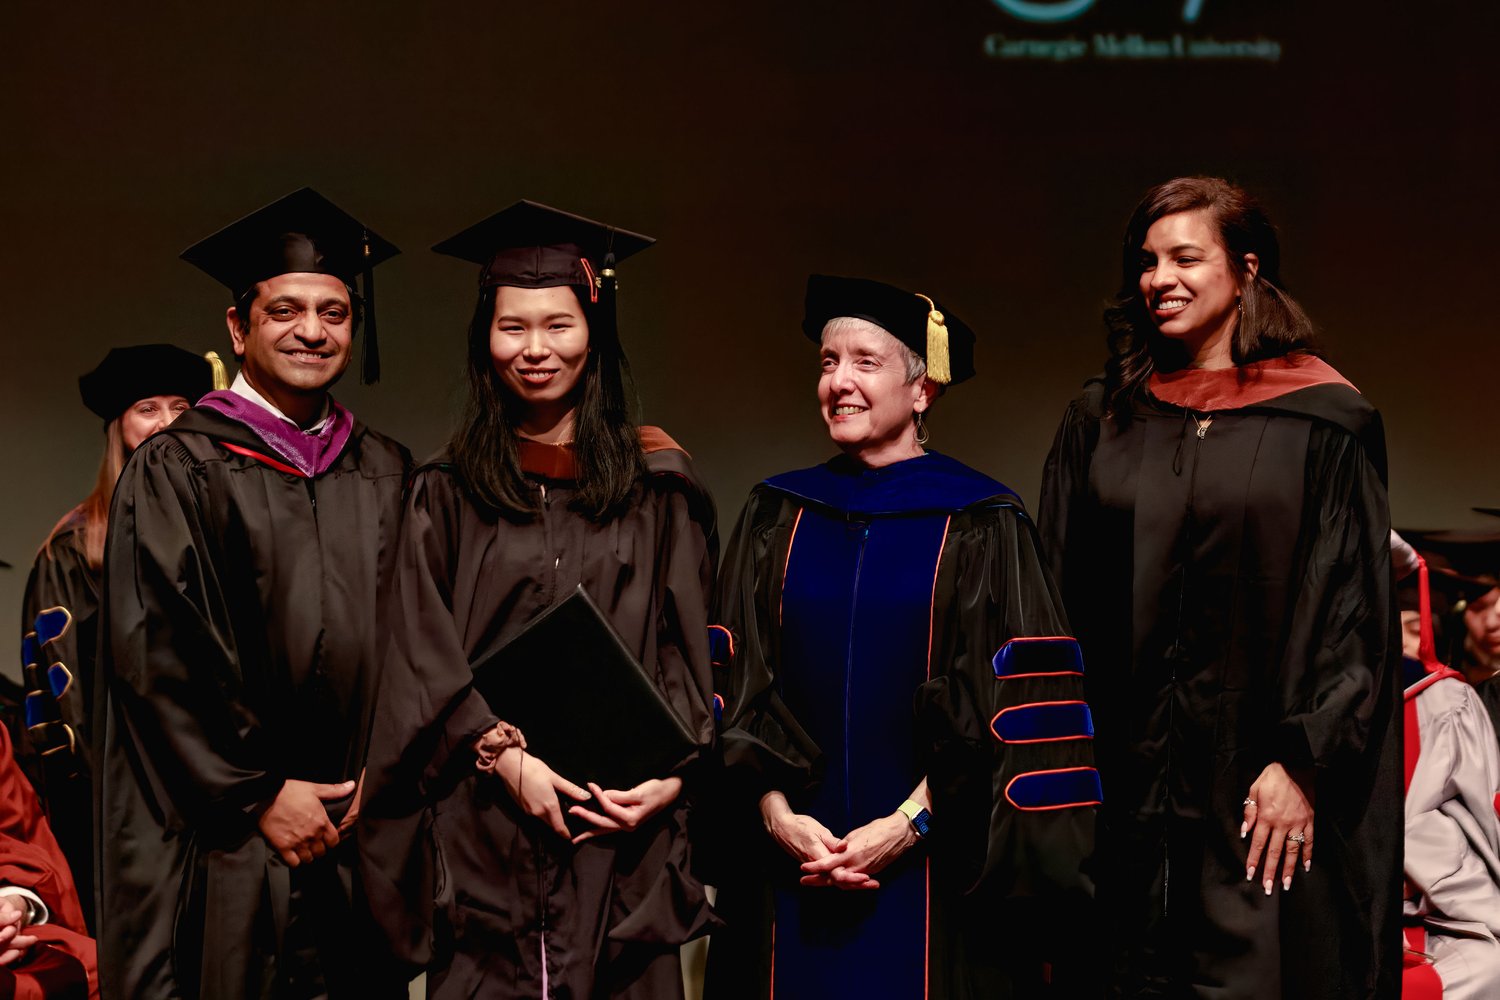   Xinyi Wang, M.Arch ‘23 was recognized as the top-ranking graduate in the Master of Architecture program.  